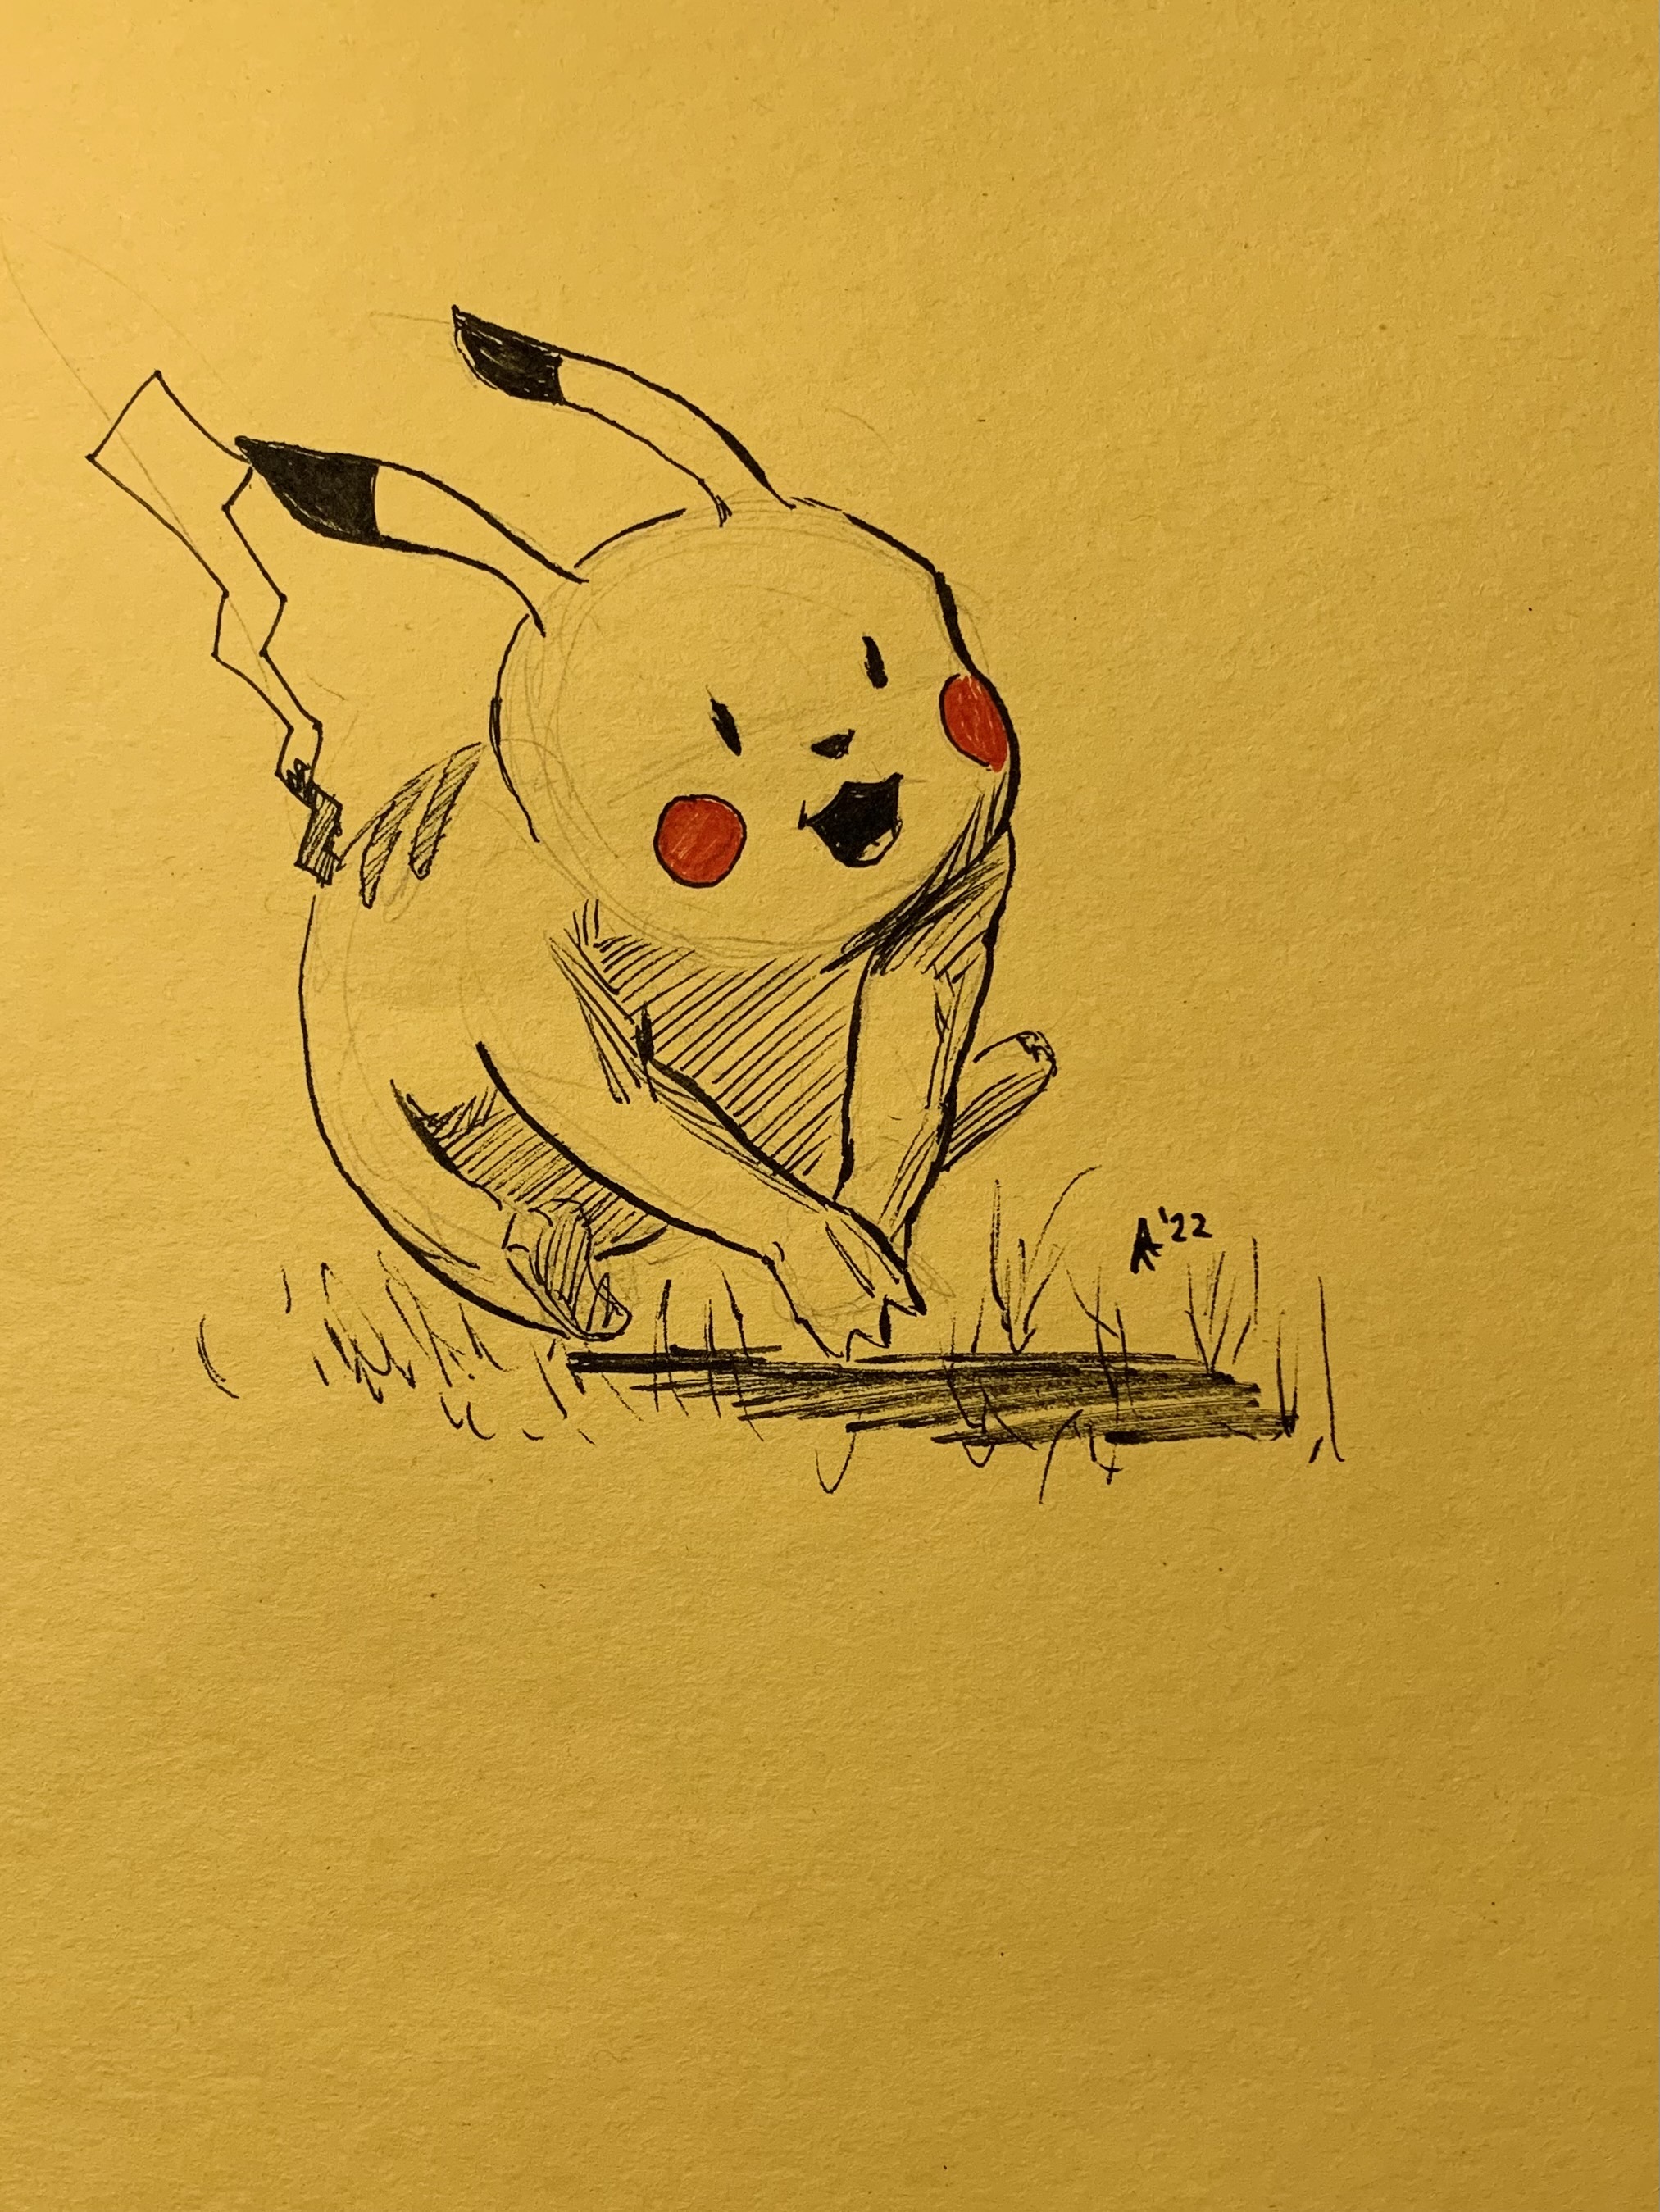 Pikachu by Andy B. Rodriguez Art by AndyRods on DeviantArt